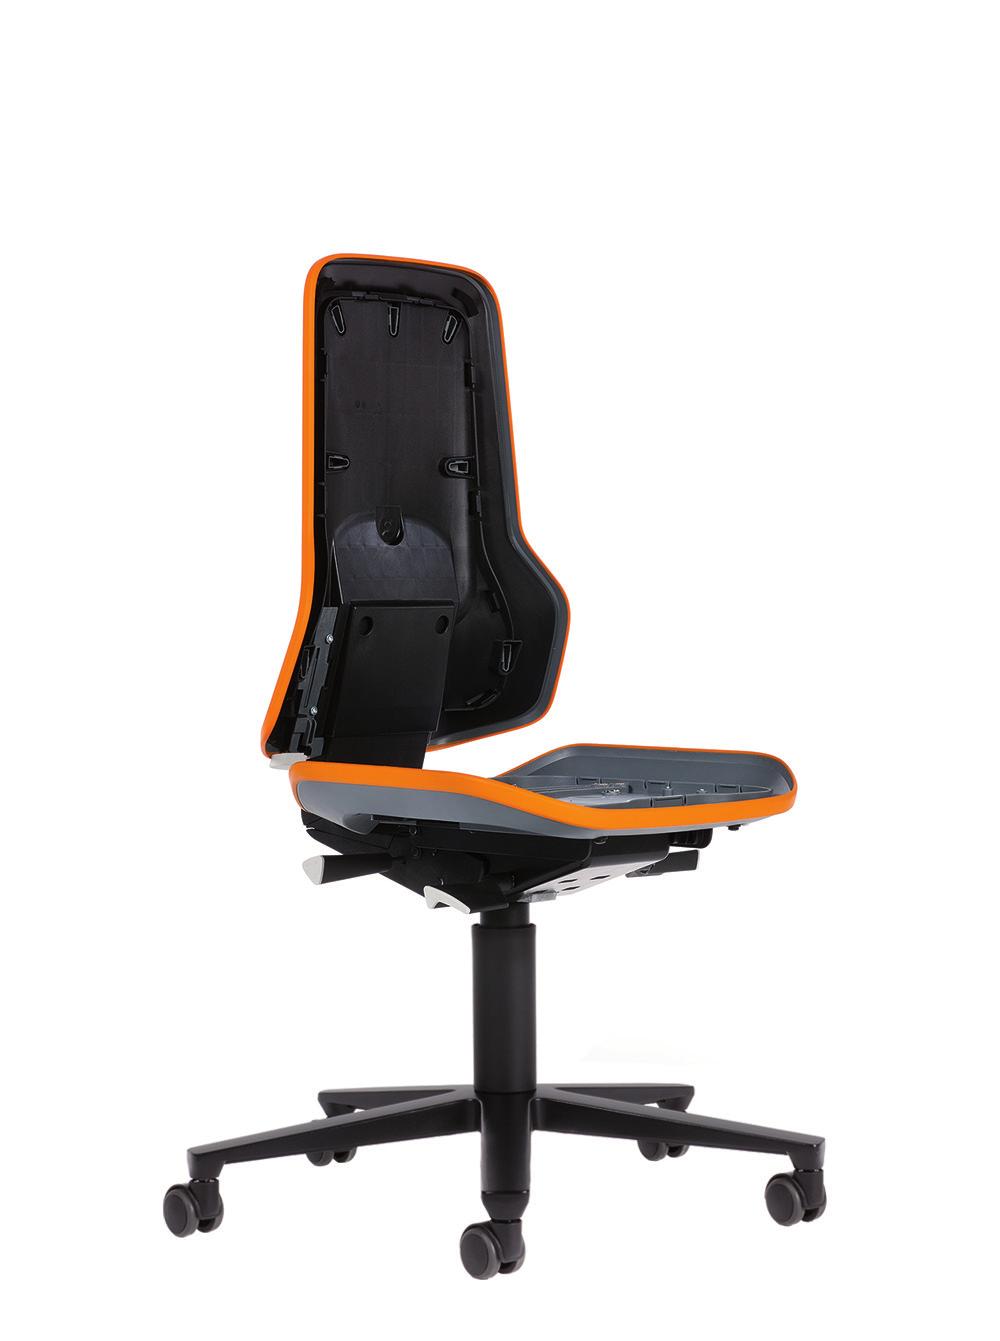 Neon New generation workplace chair All the same s and features as in Treston Plus In addition changeable upholstery and flex strip for protection of the chair